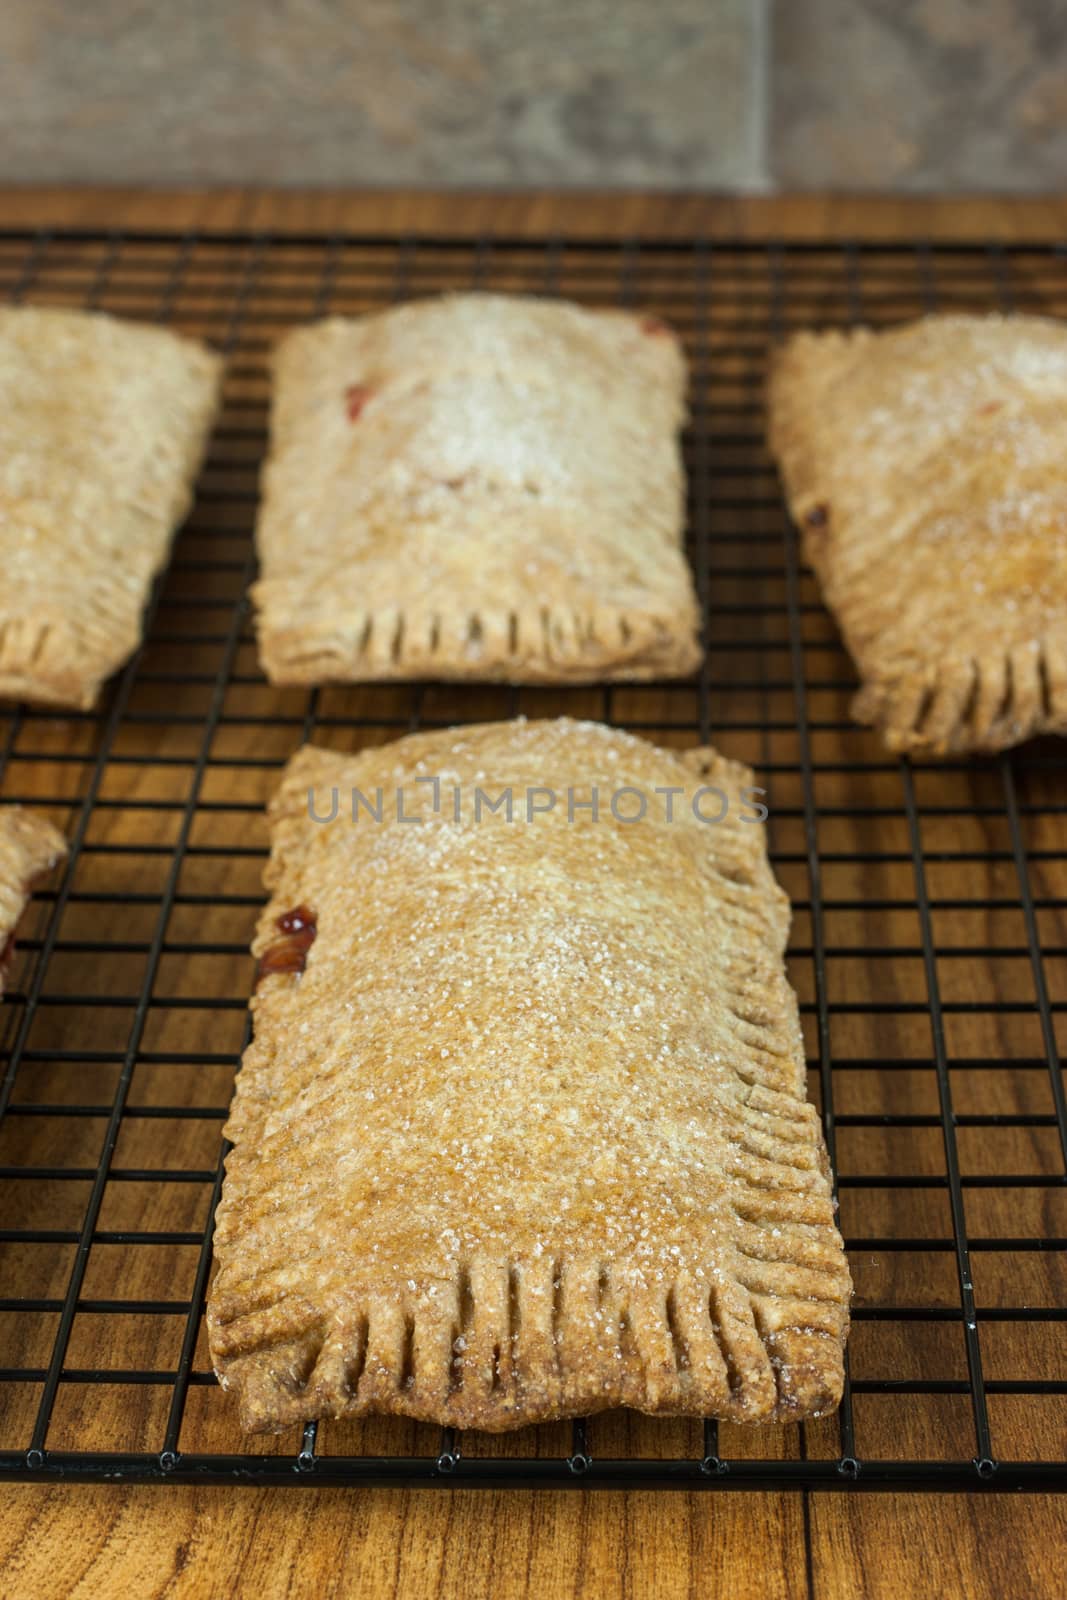 Whole Wheat Toaster Pastries by SouthernLightStudios